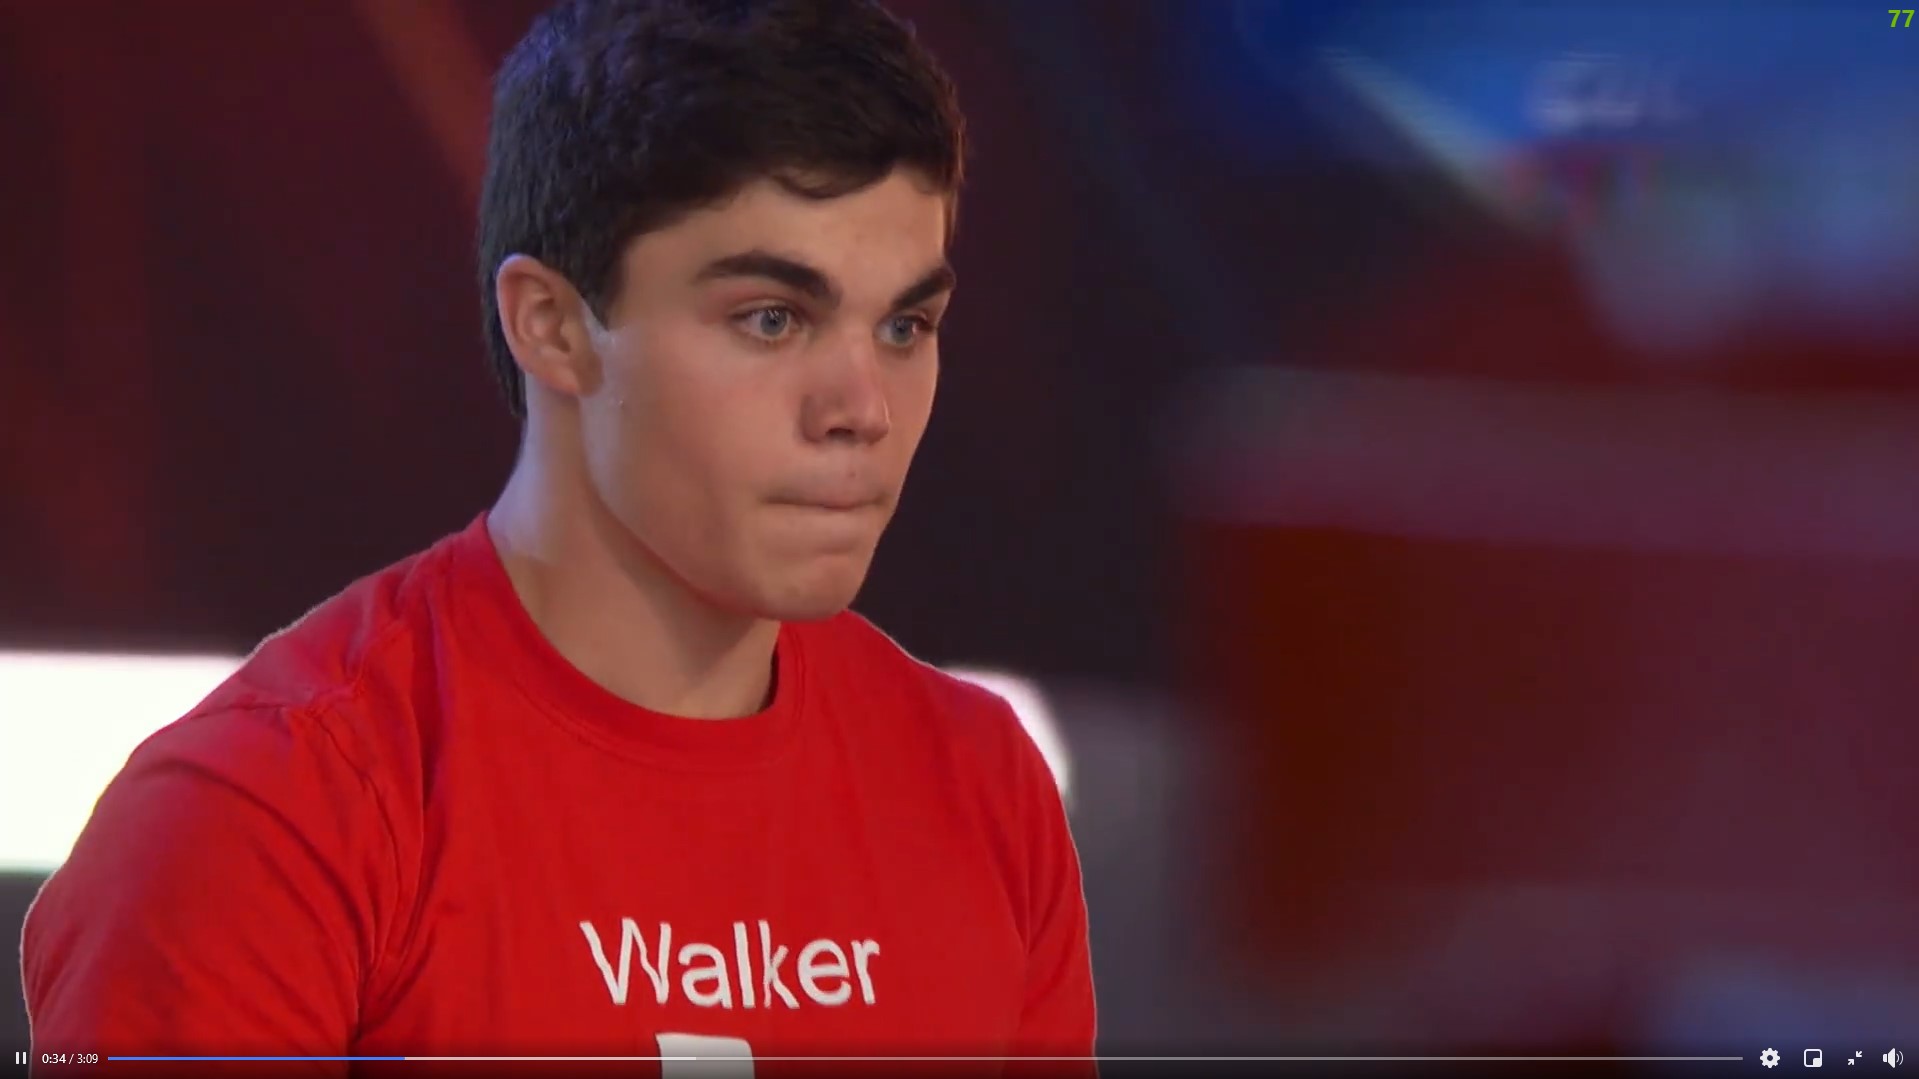 Does Vance Walker From American Ninja Warrior Have Cerebral Palsy? How